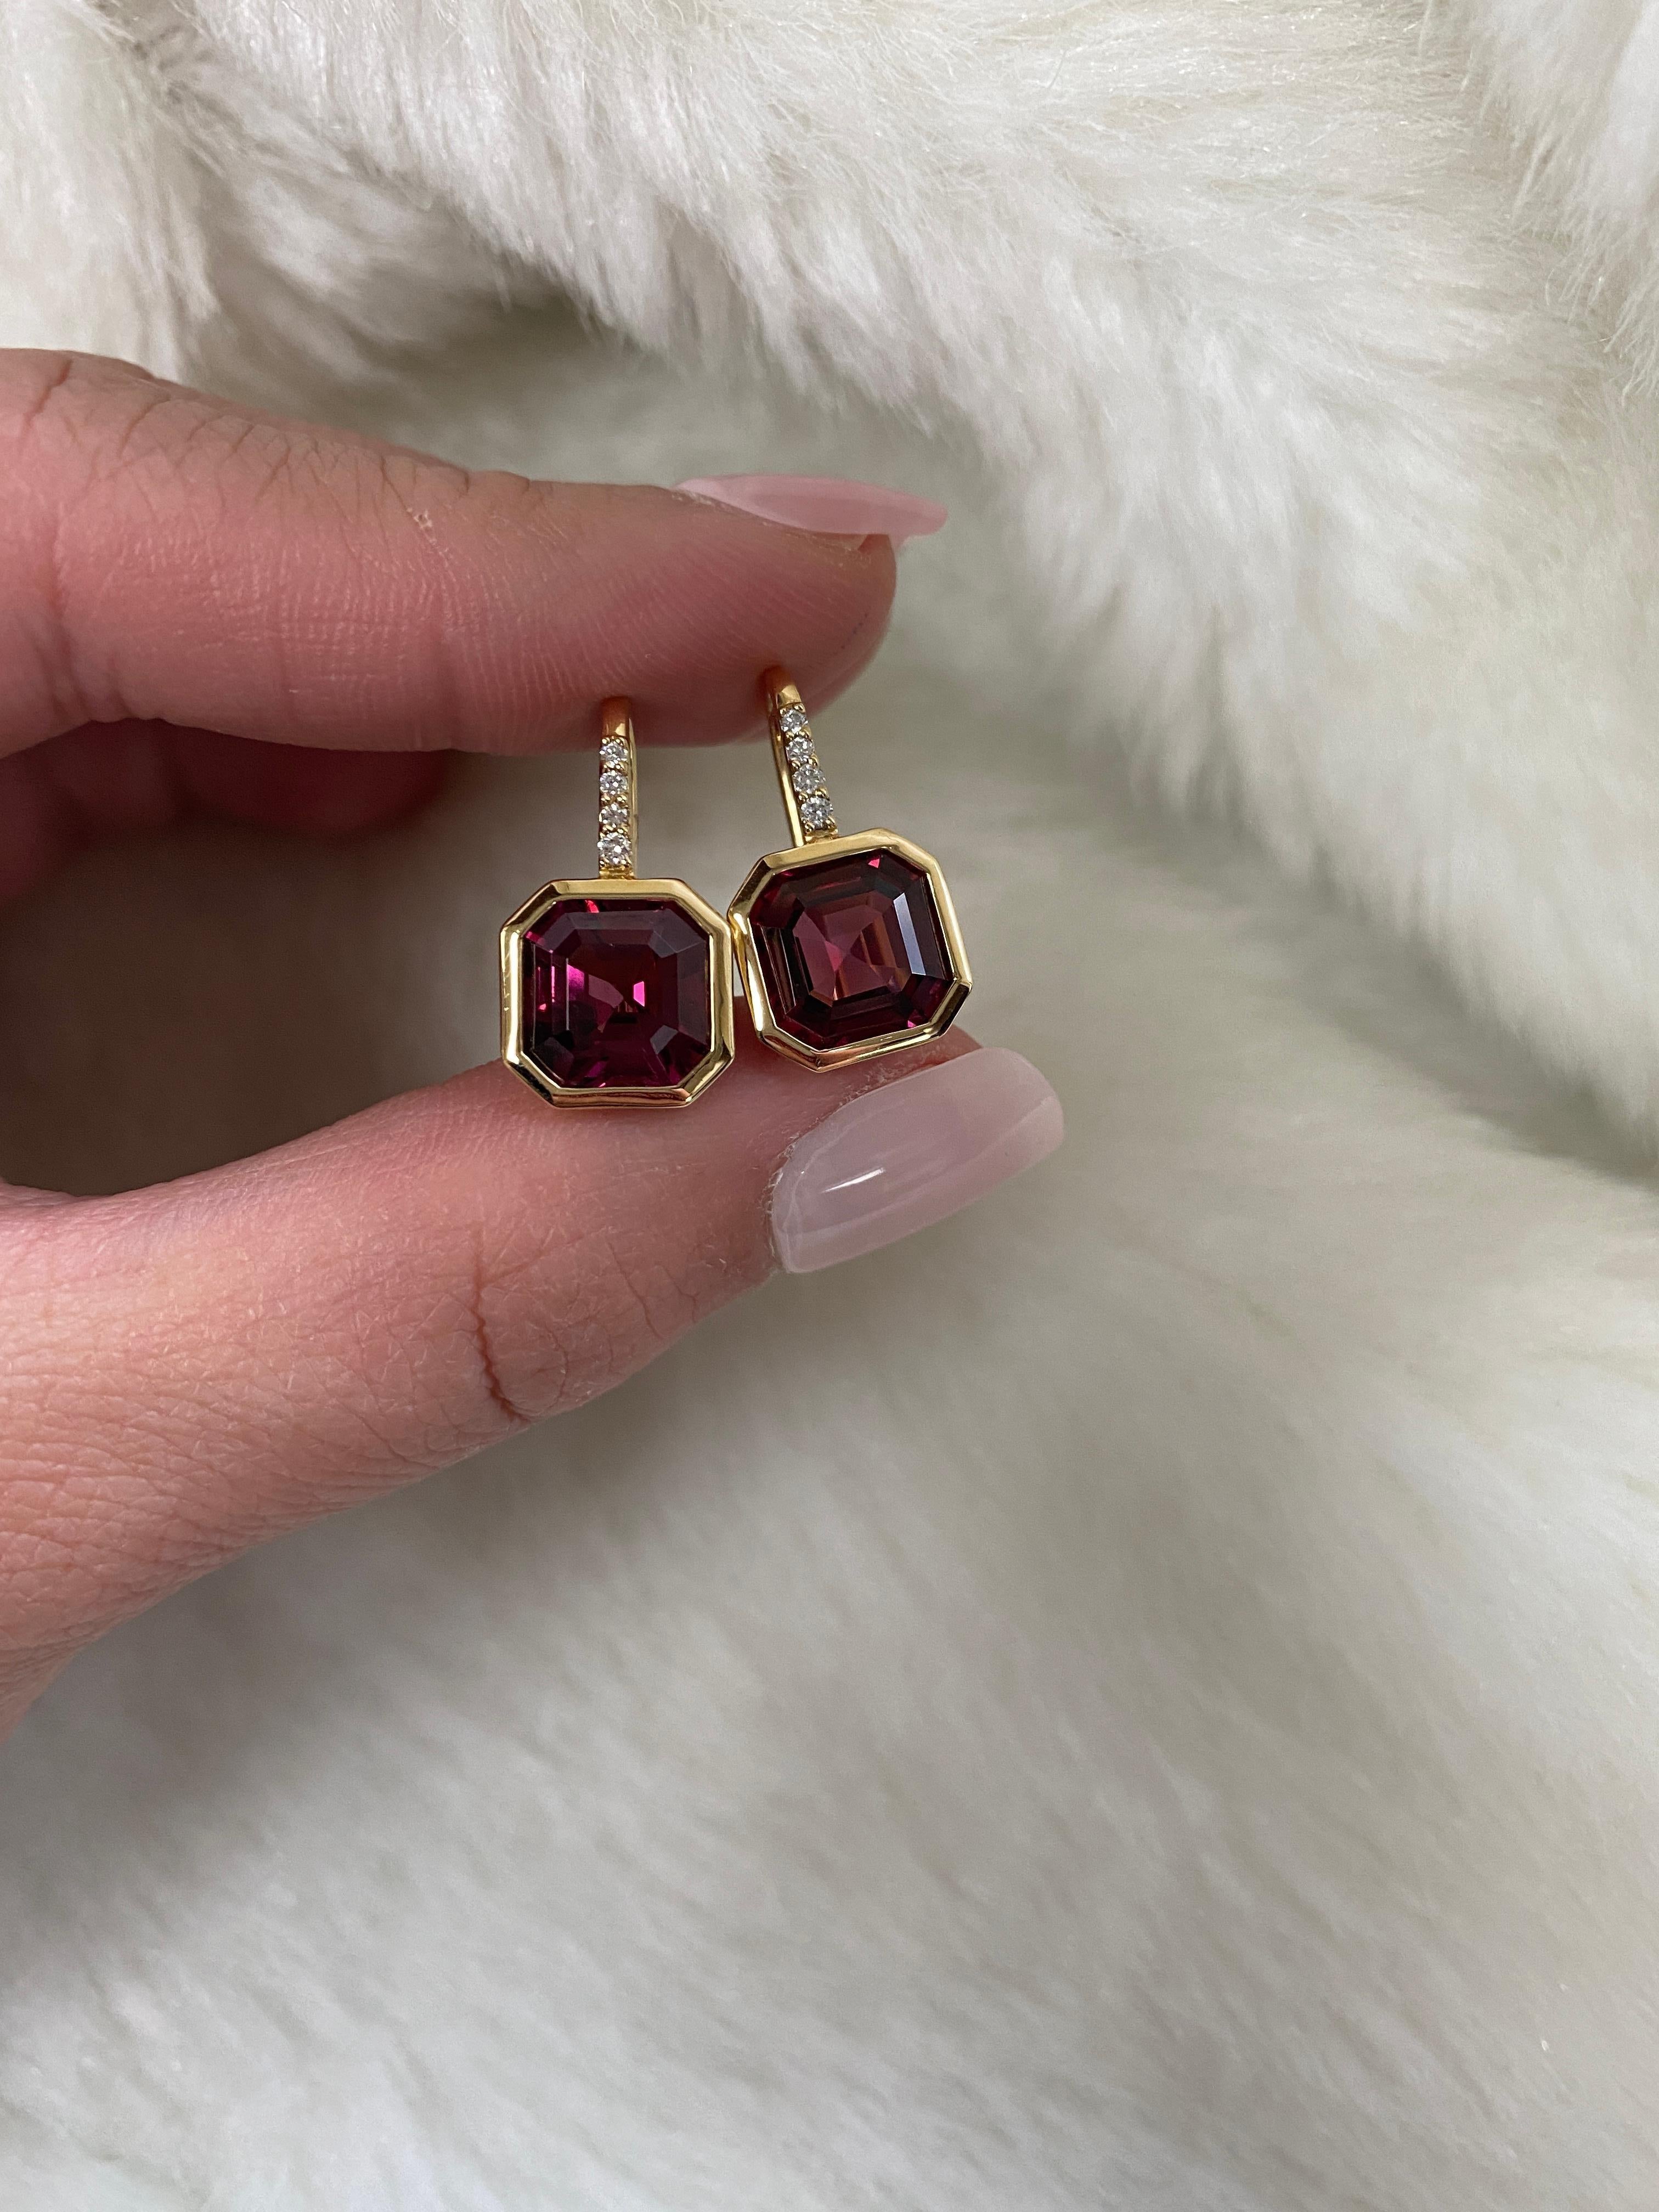 Elevate your style with these exquisite earrings featuring a stunning 9 x 9 mm Asscher-cut Garnet gemstone. Expertly set on a delicate wire of 18K Gold, these earrings are adorned with four dazzling Diamonds, adding a touch of luxury and sparkle to